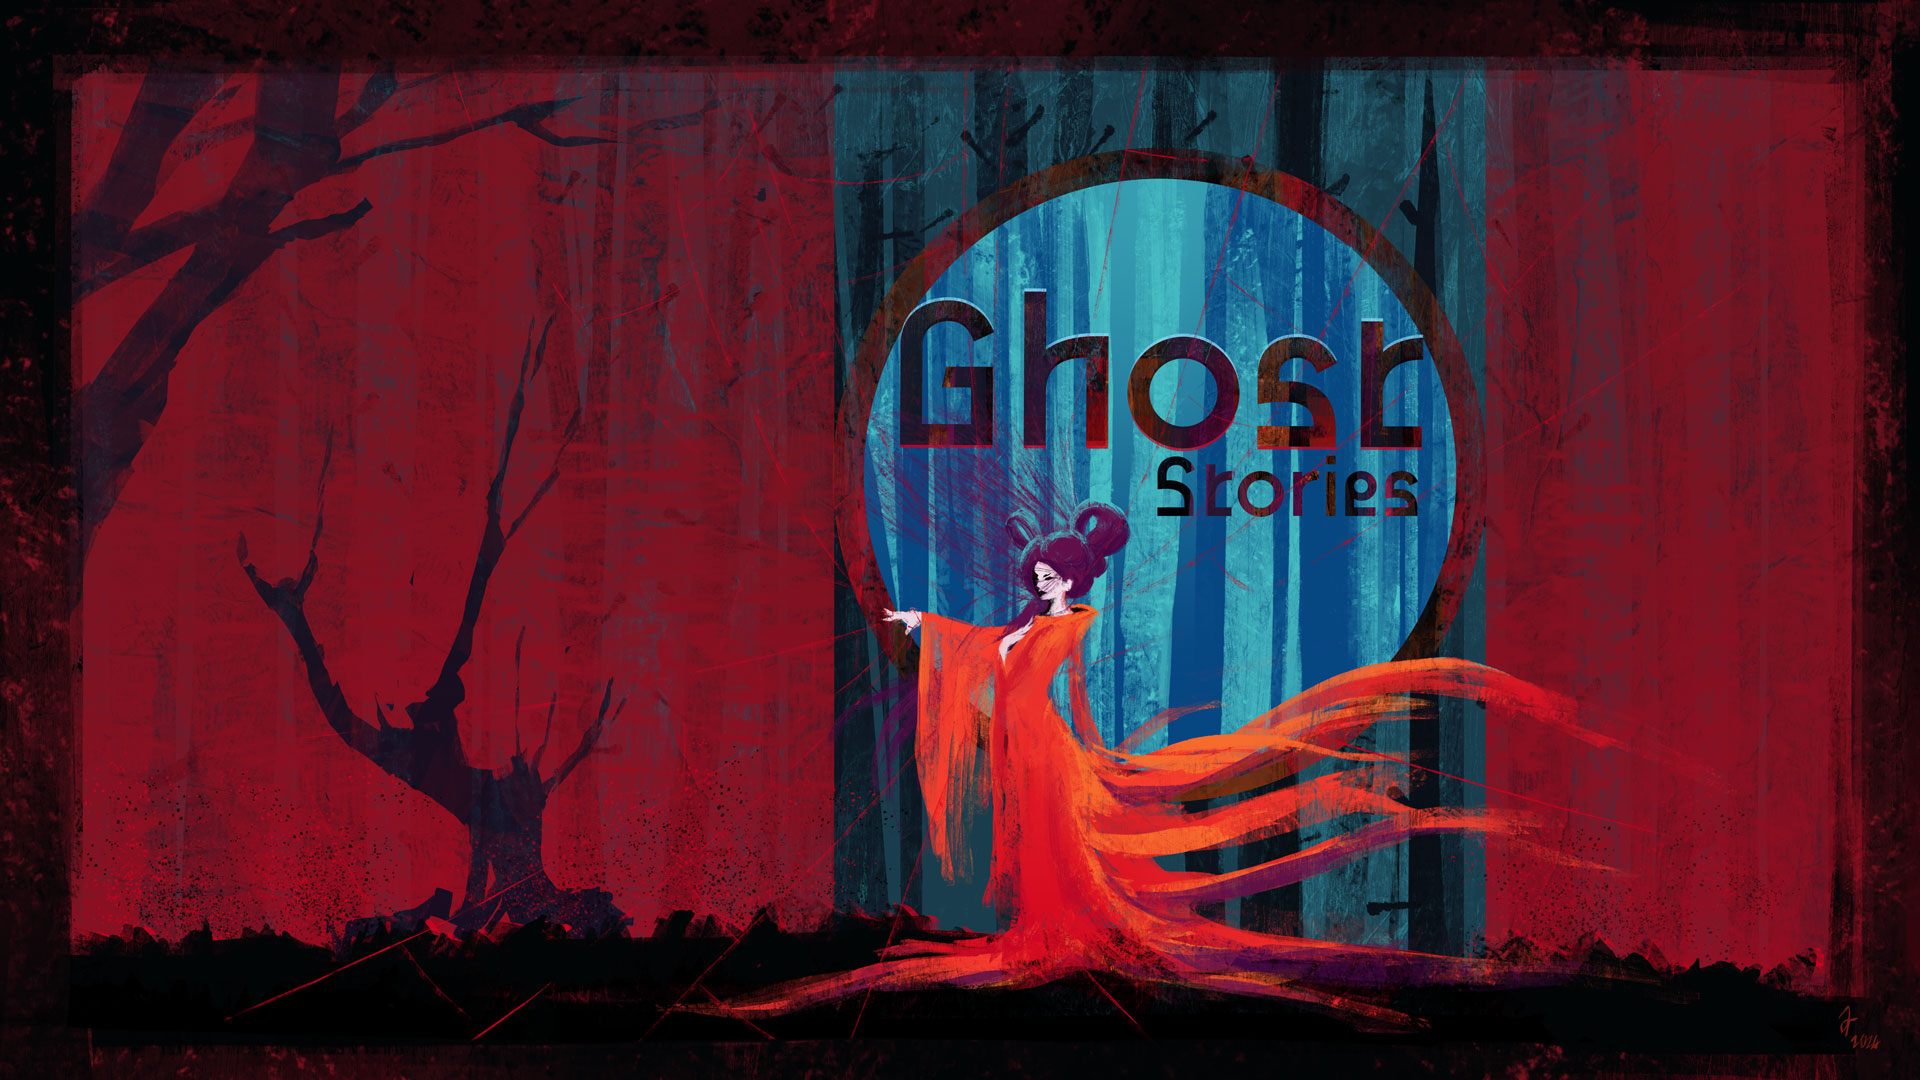 Illustration (Digital painting) made by Albertine Ralenti, inspired by Ghost Stories, a boardgame by Antoine Bauza. It represents a ghost woman in a dark and red place.